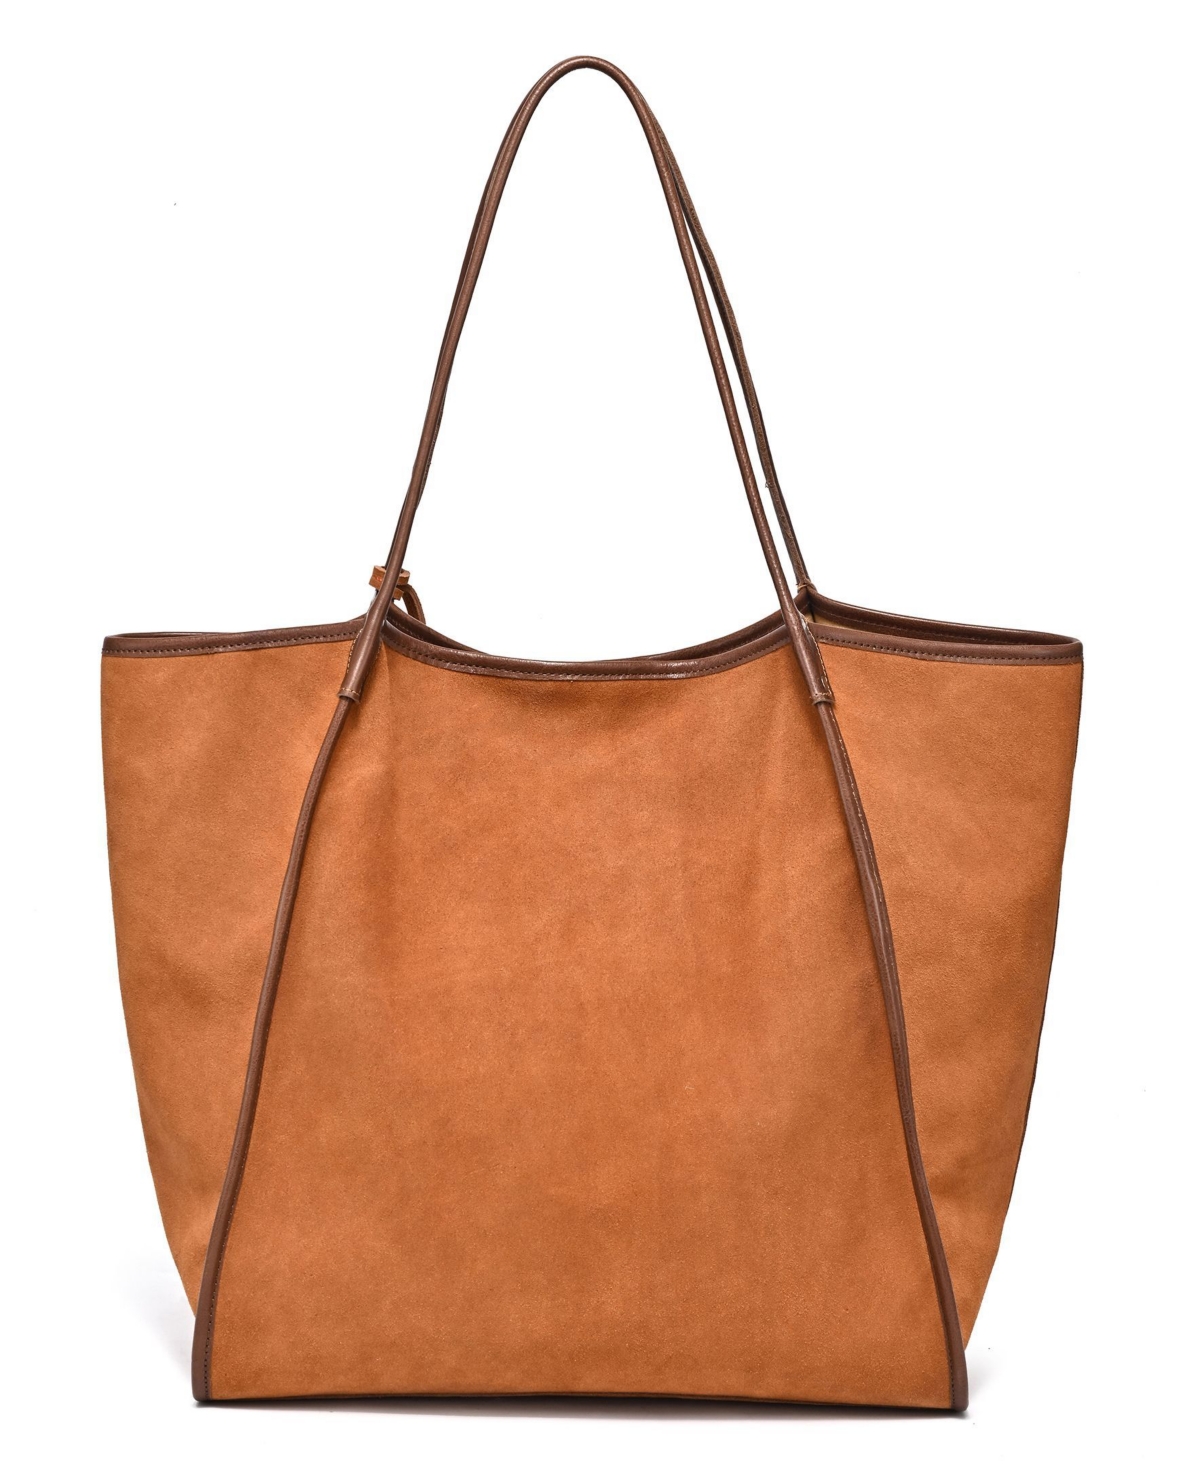 Women's Genuine Leather Pine Hill Tote Bag - Caramel